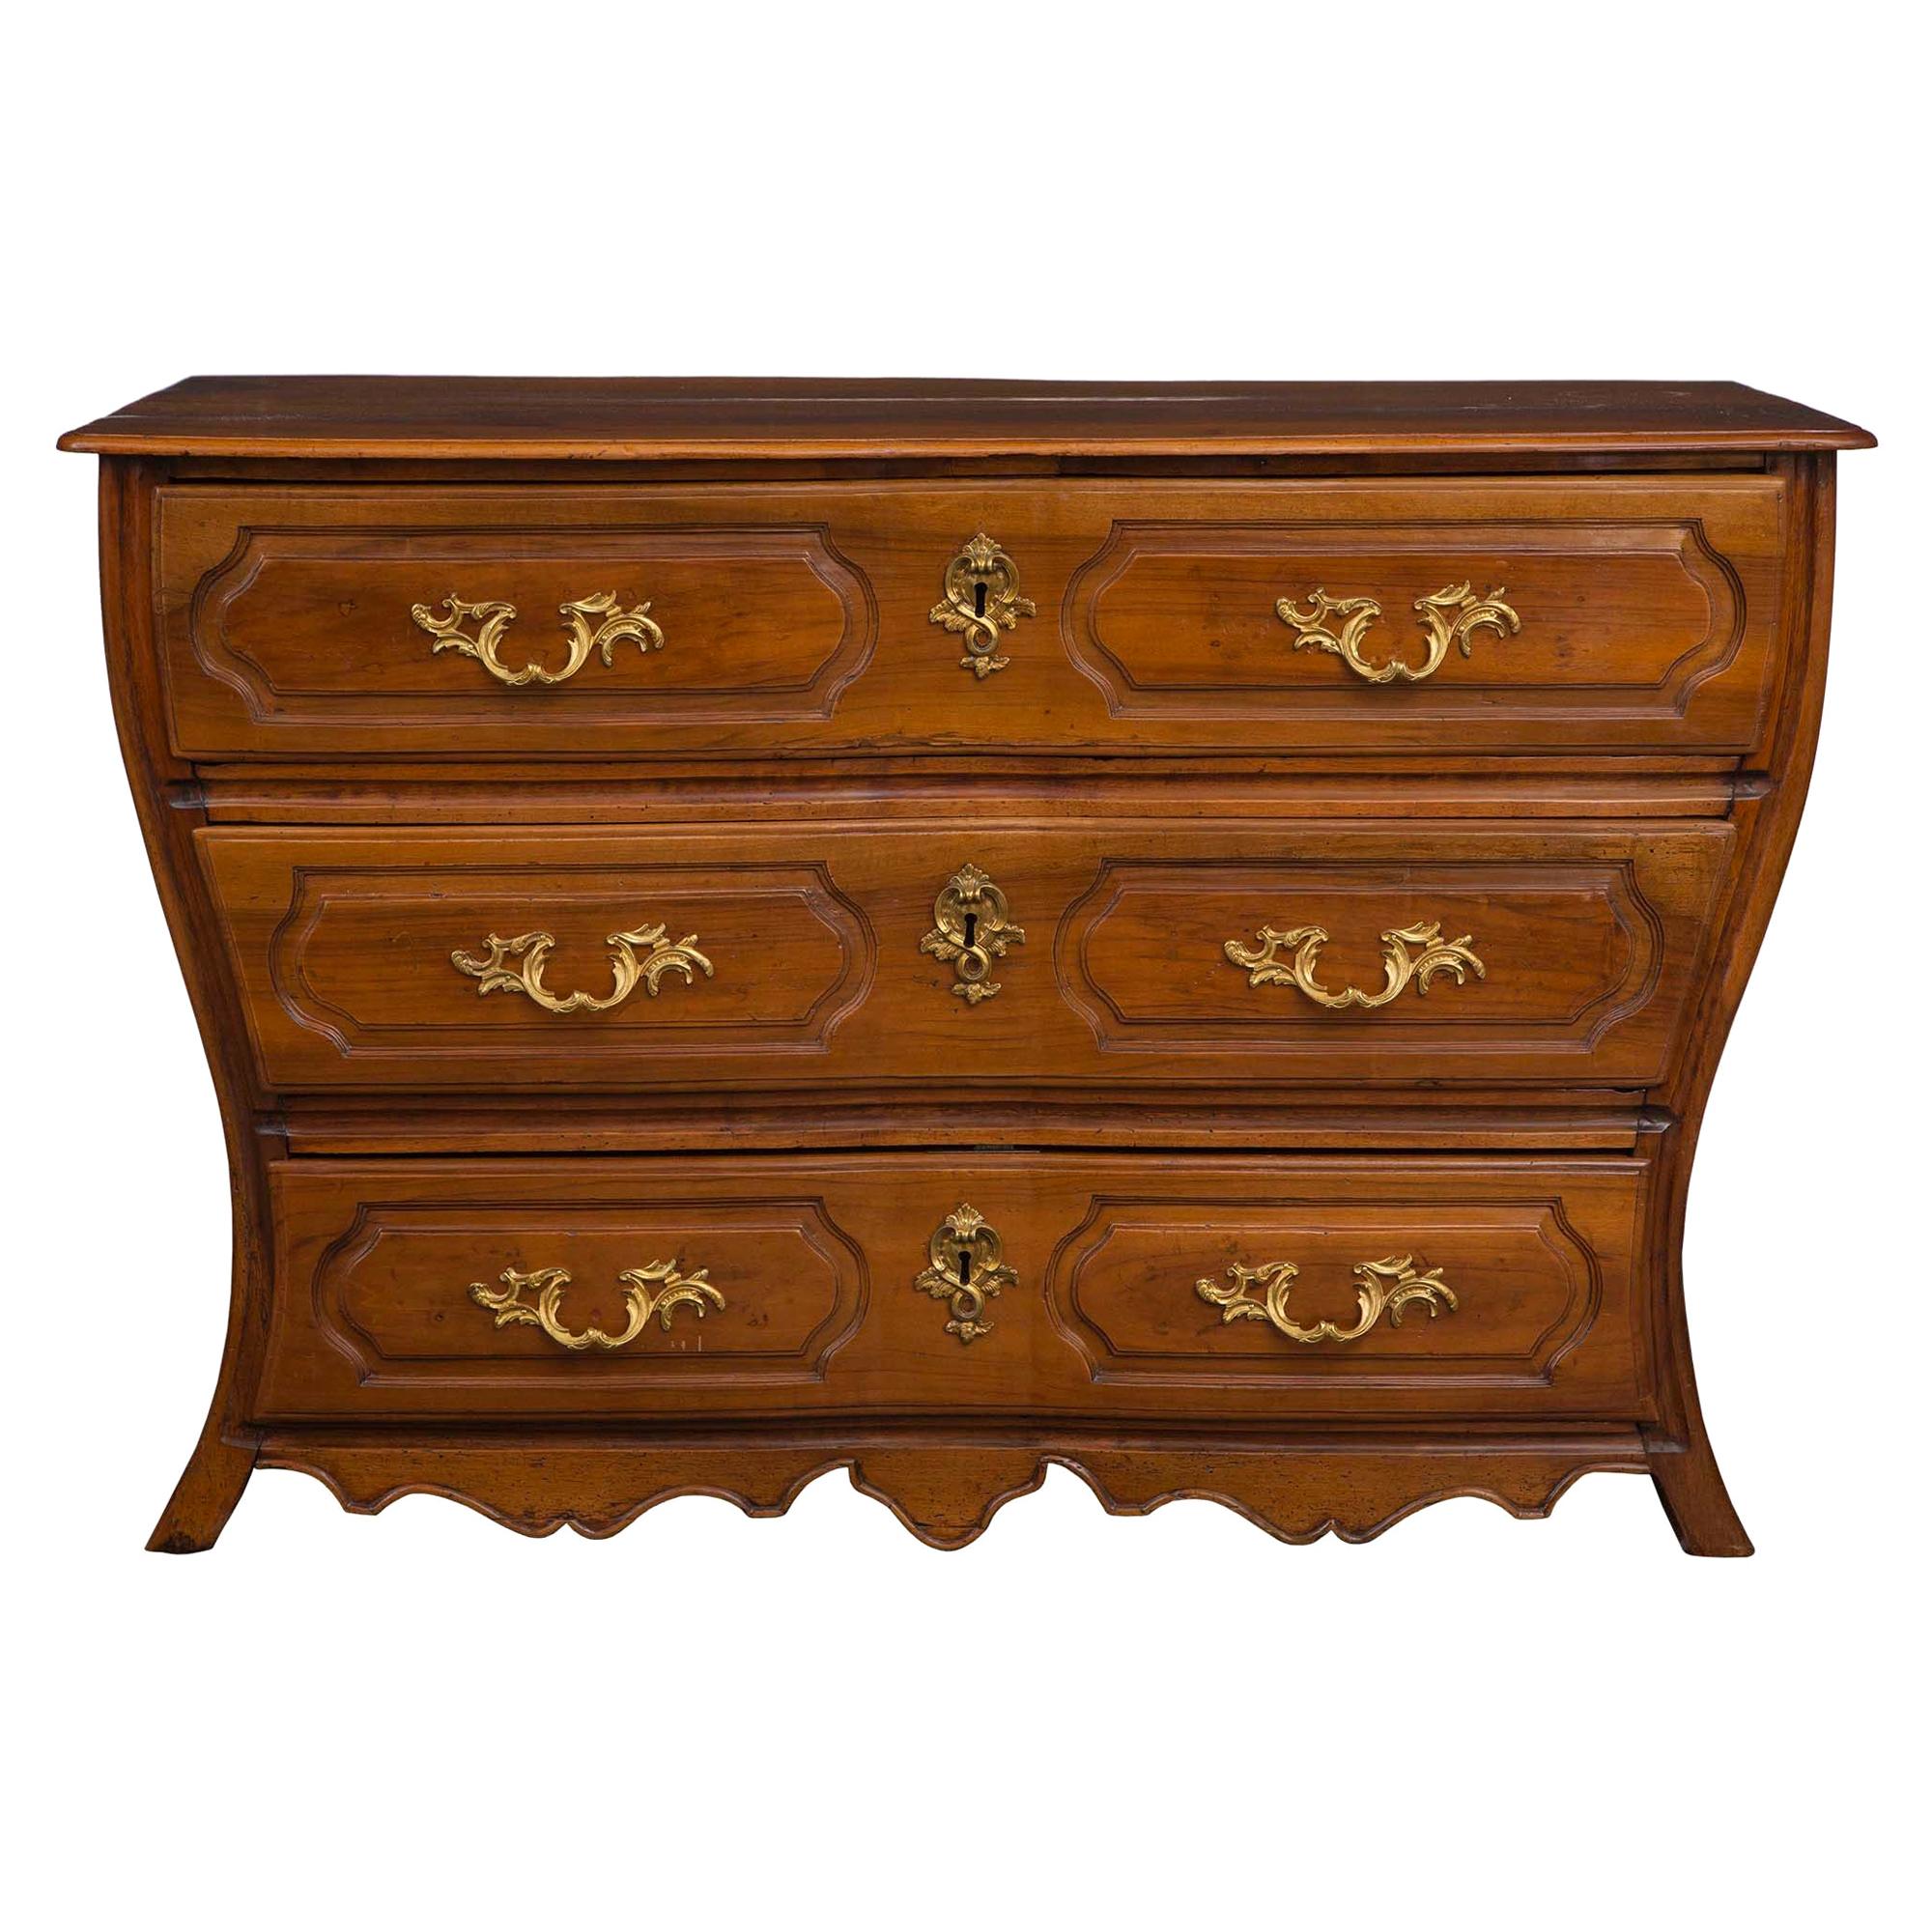 French 18th Century Louis XV Period Walnut and Ormolu Three-Drawer Commode